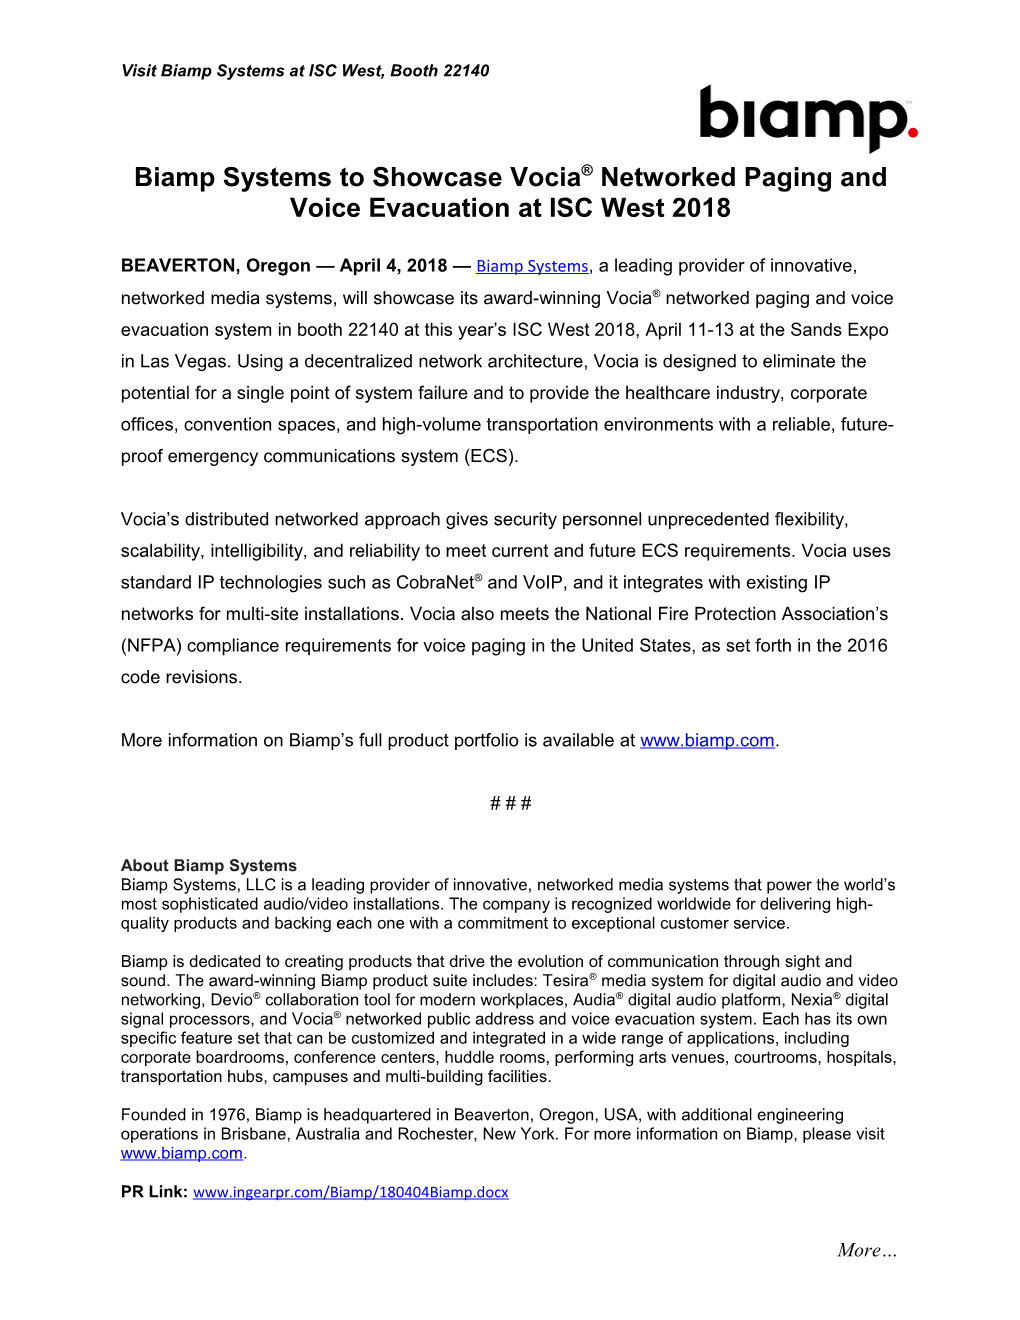 Biamp Systemsto Showcasevocia Networked Paging and Voice Evacuation at ISC West 2018